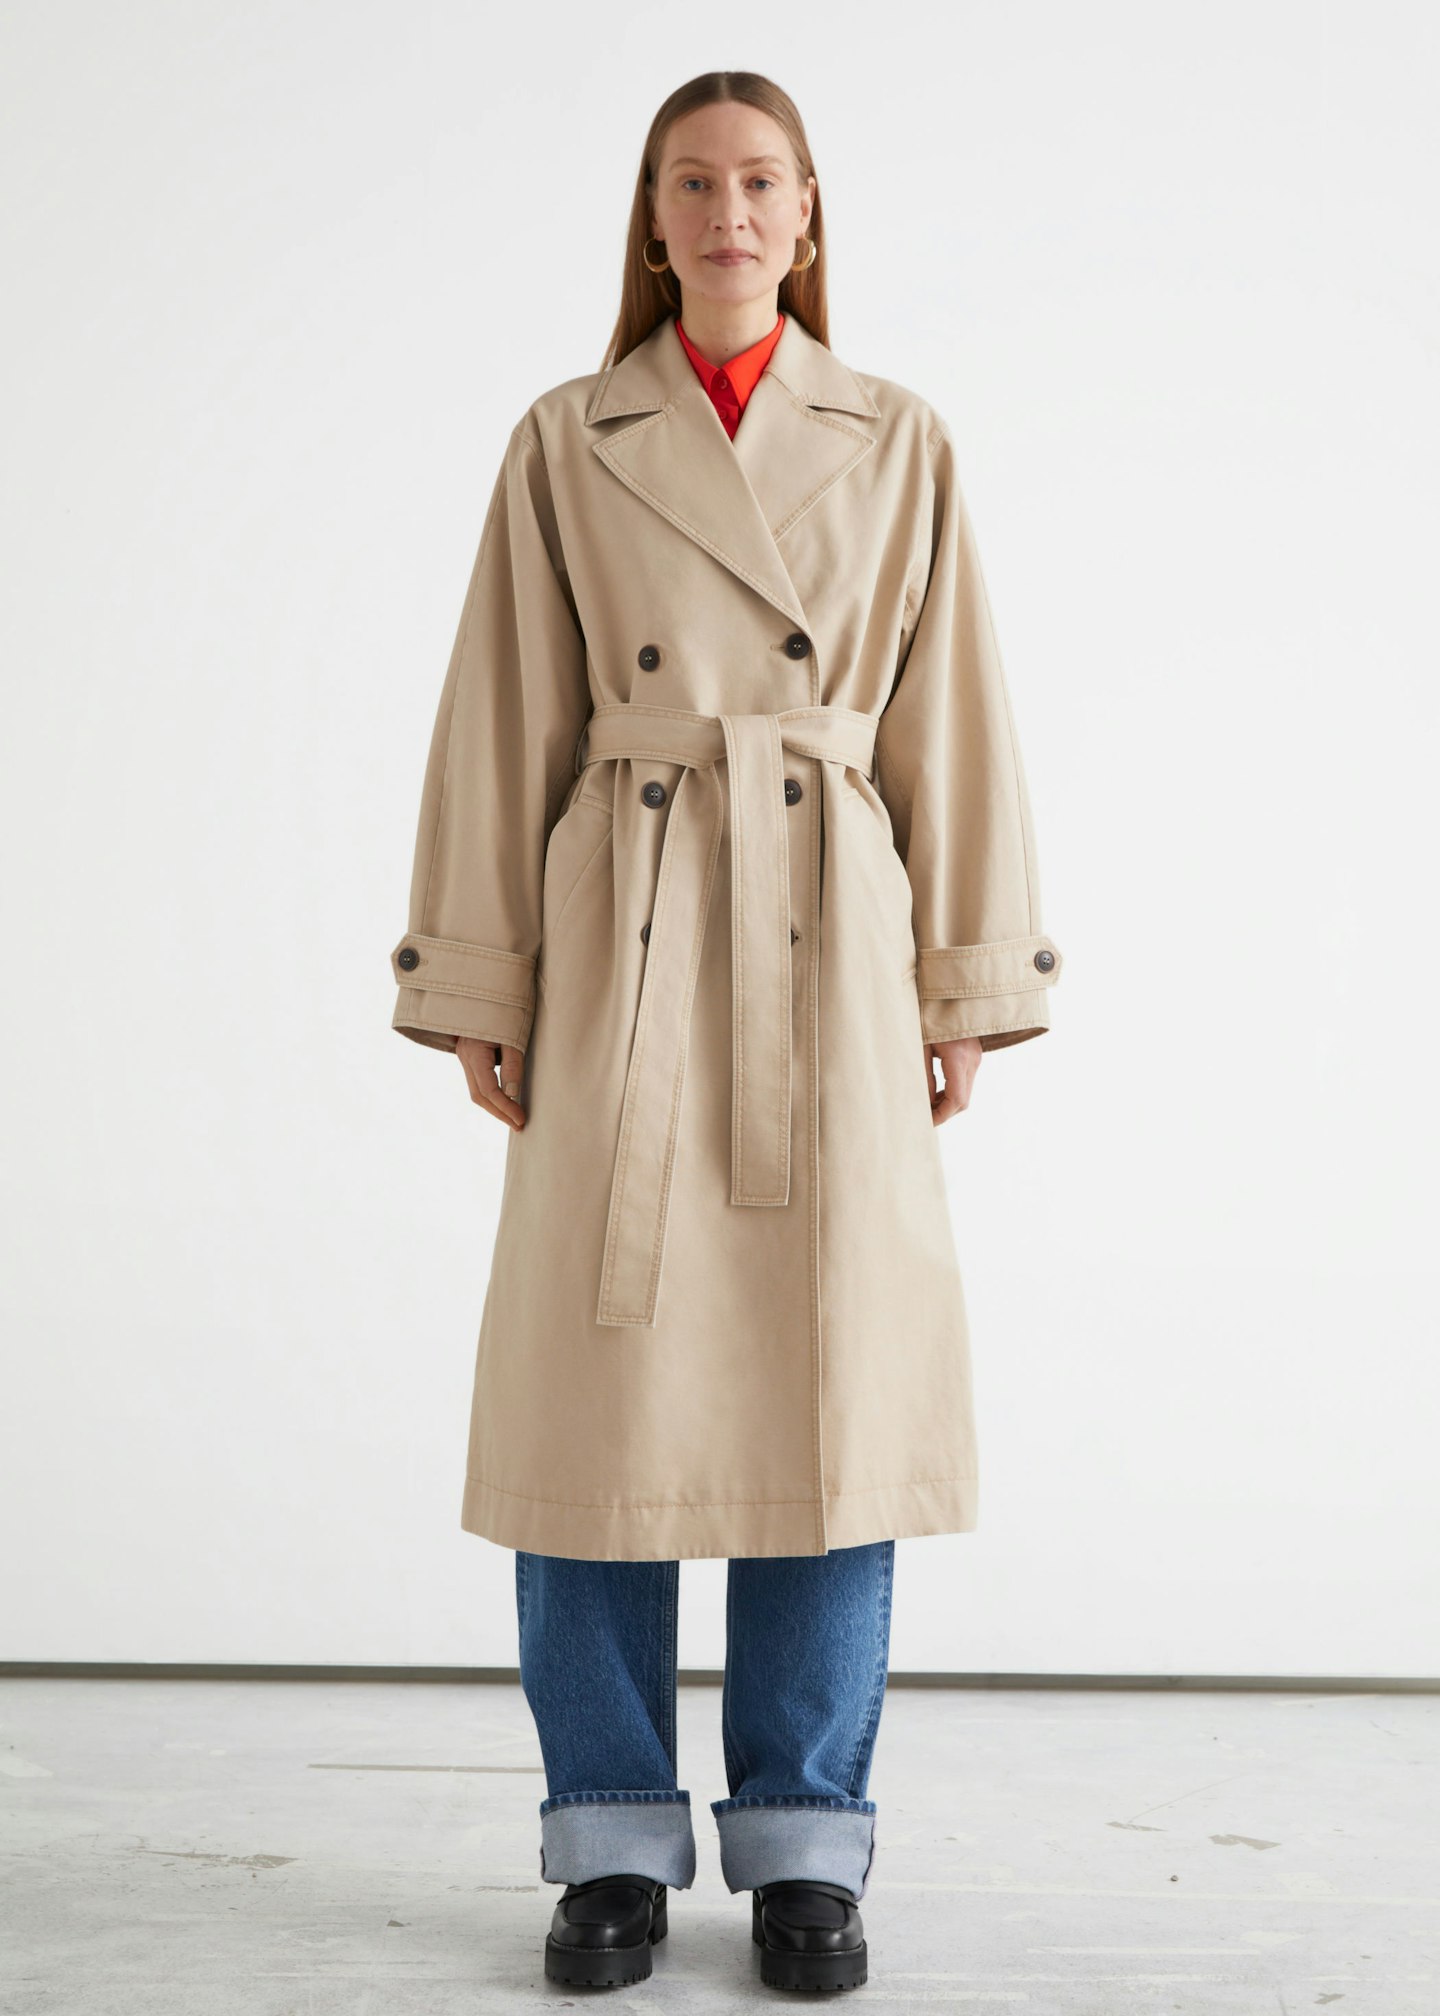 & Other Stories, Relaxed Trench Coat, £120